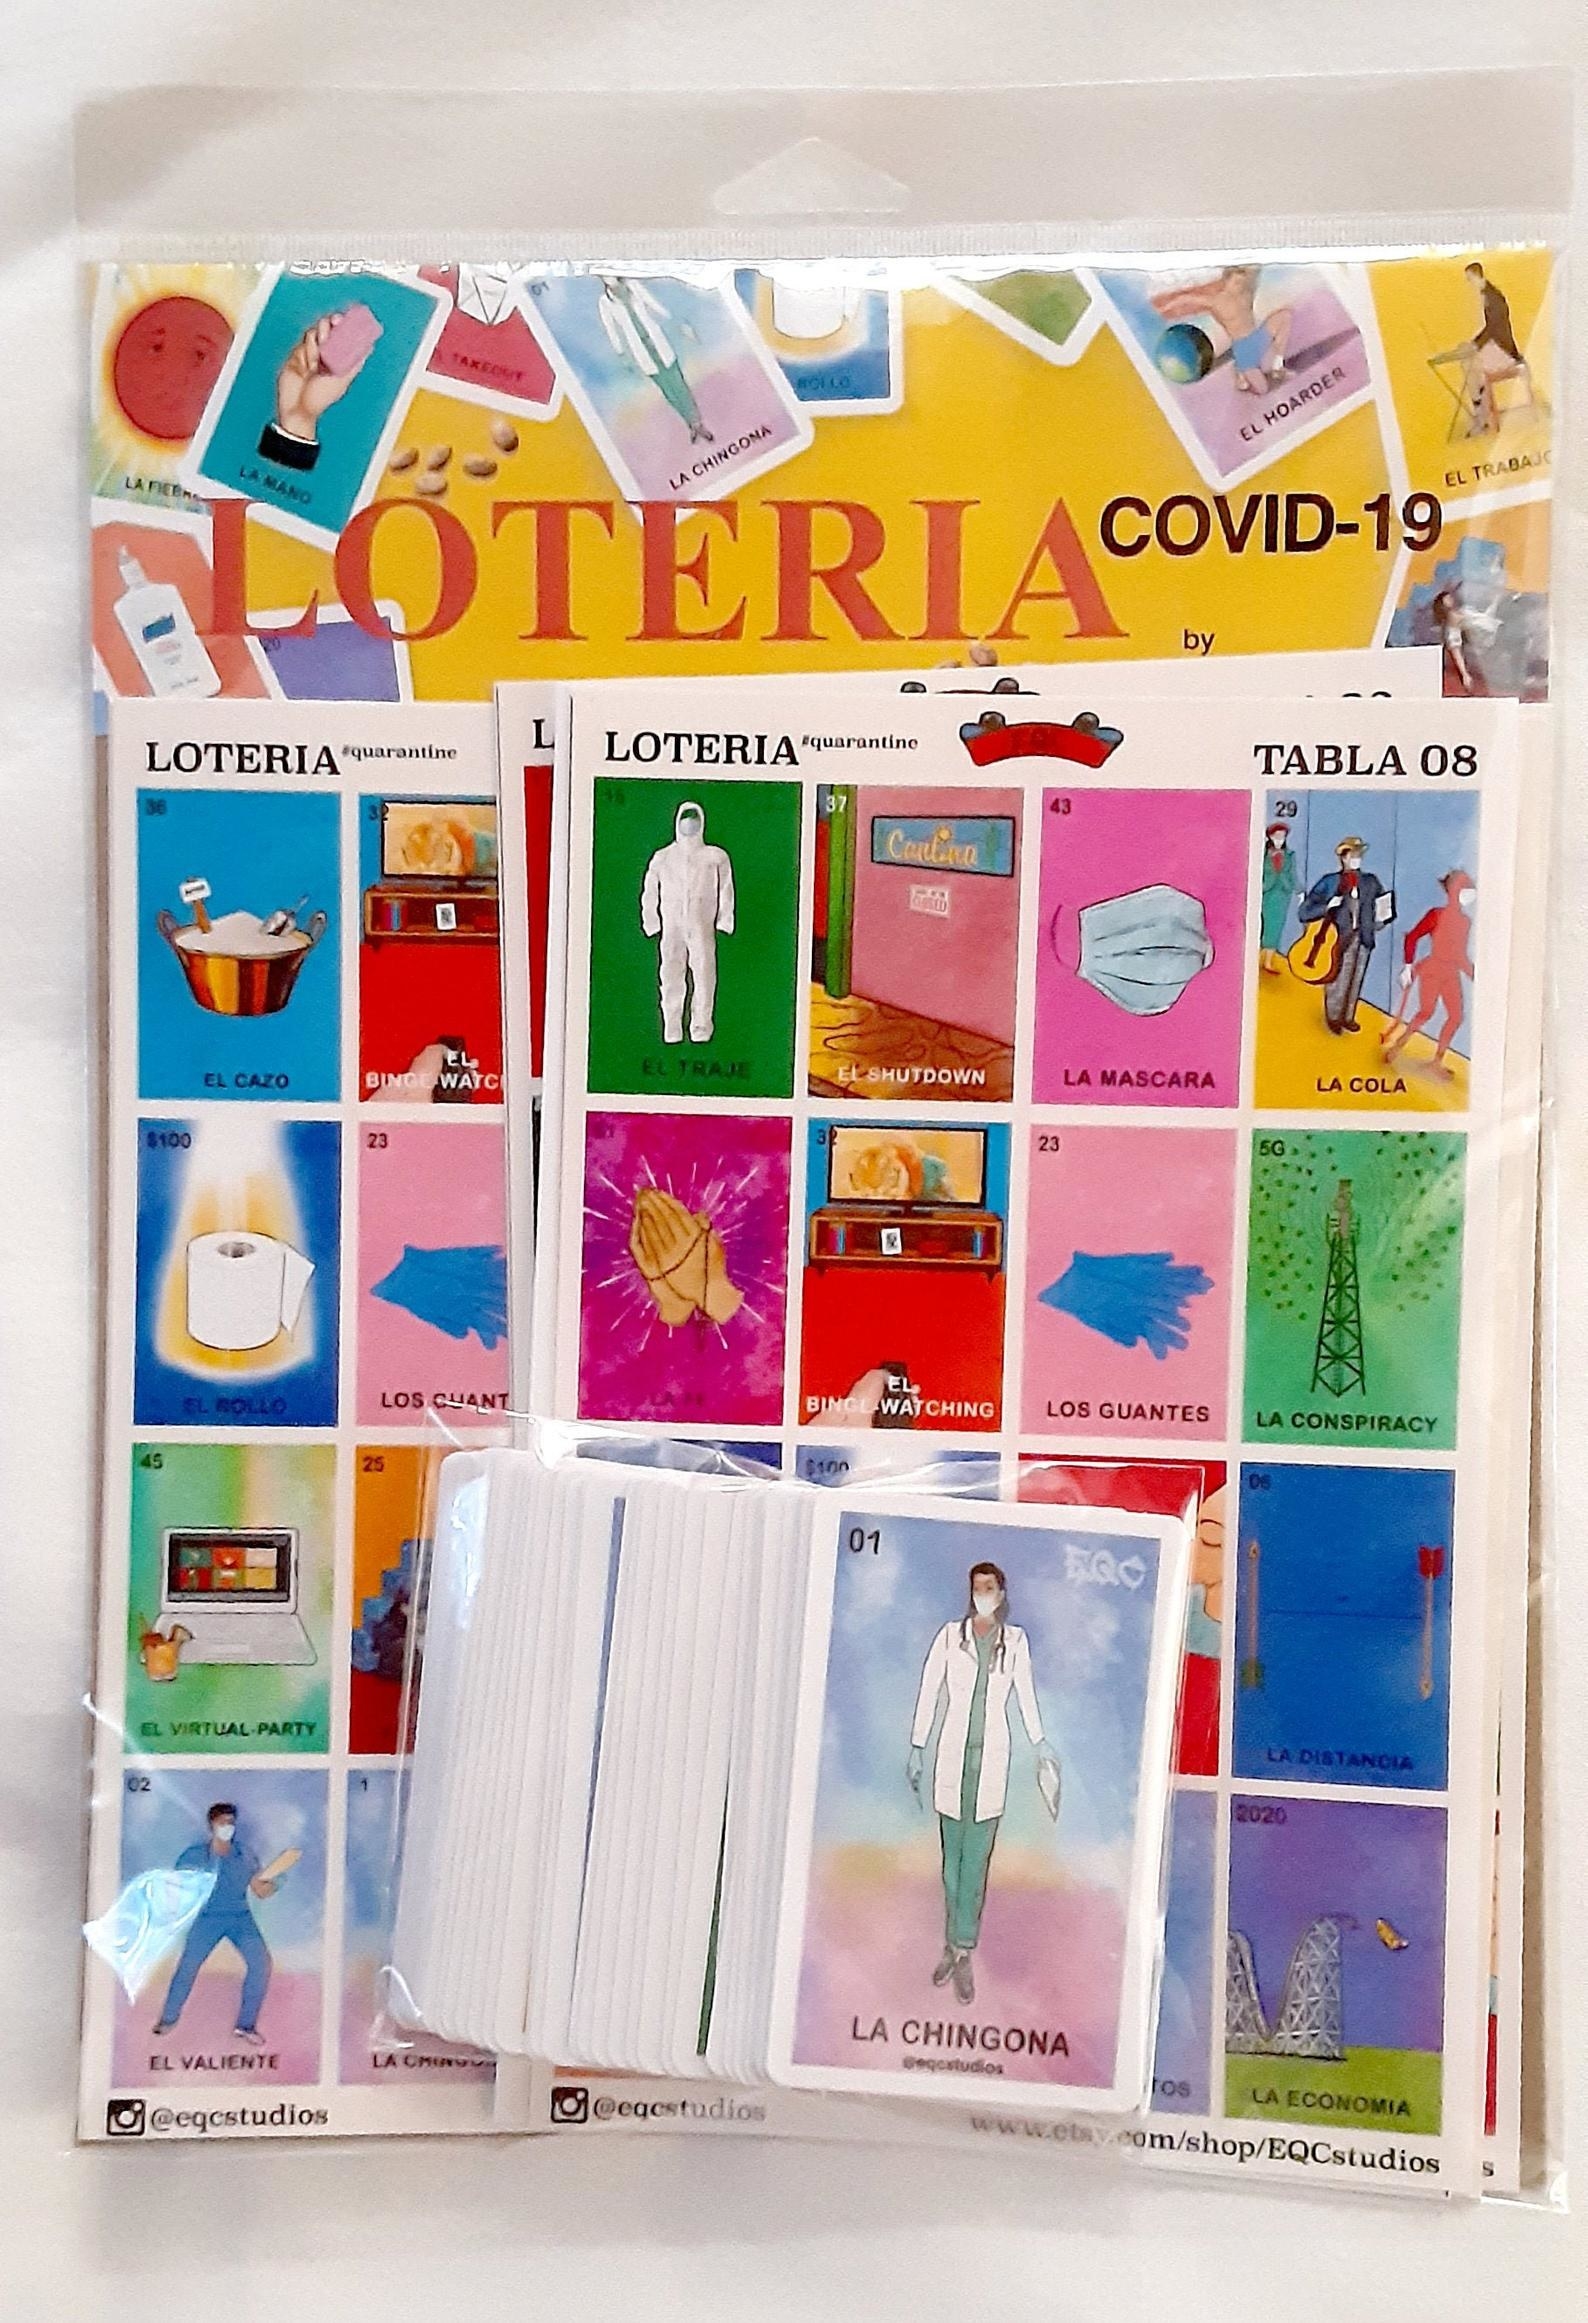 bag of Loteria cards with photos on them similar to bingo squares and a stack of cards for calling out the terms that players would search for on their cards